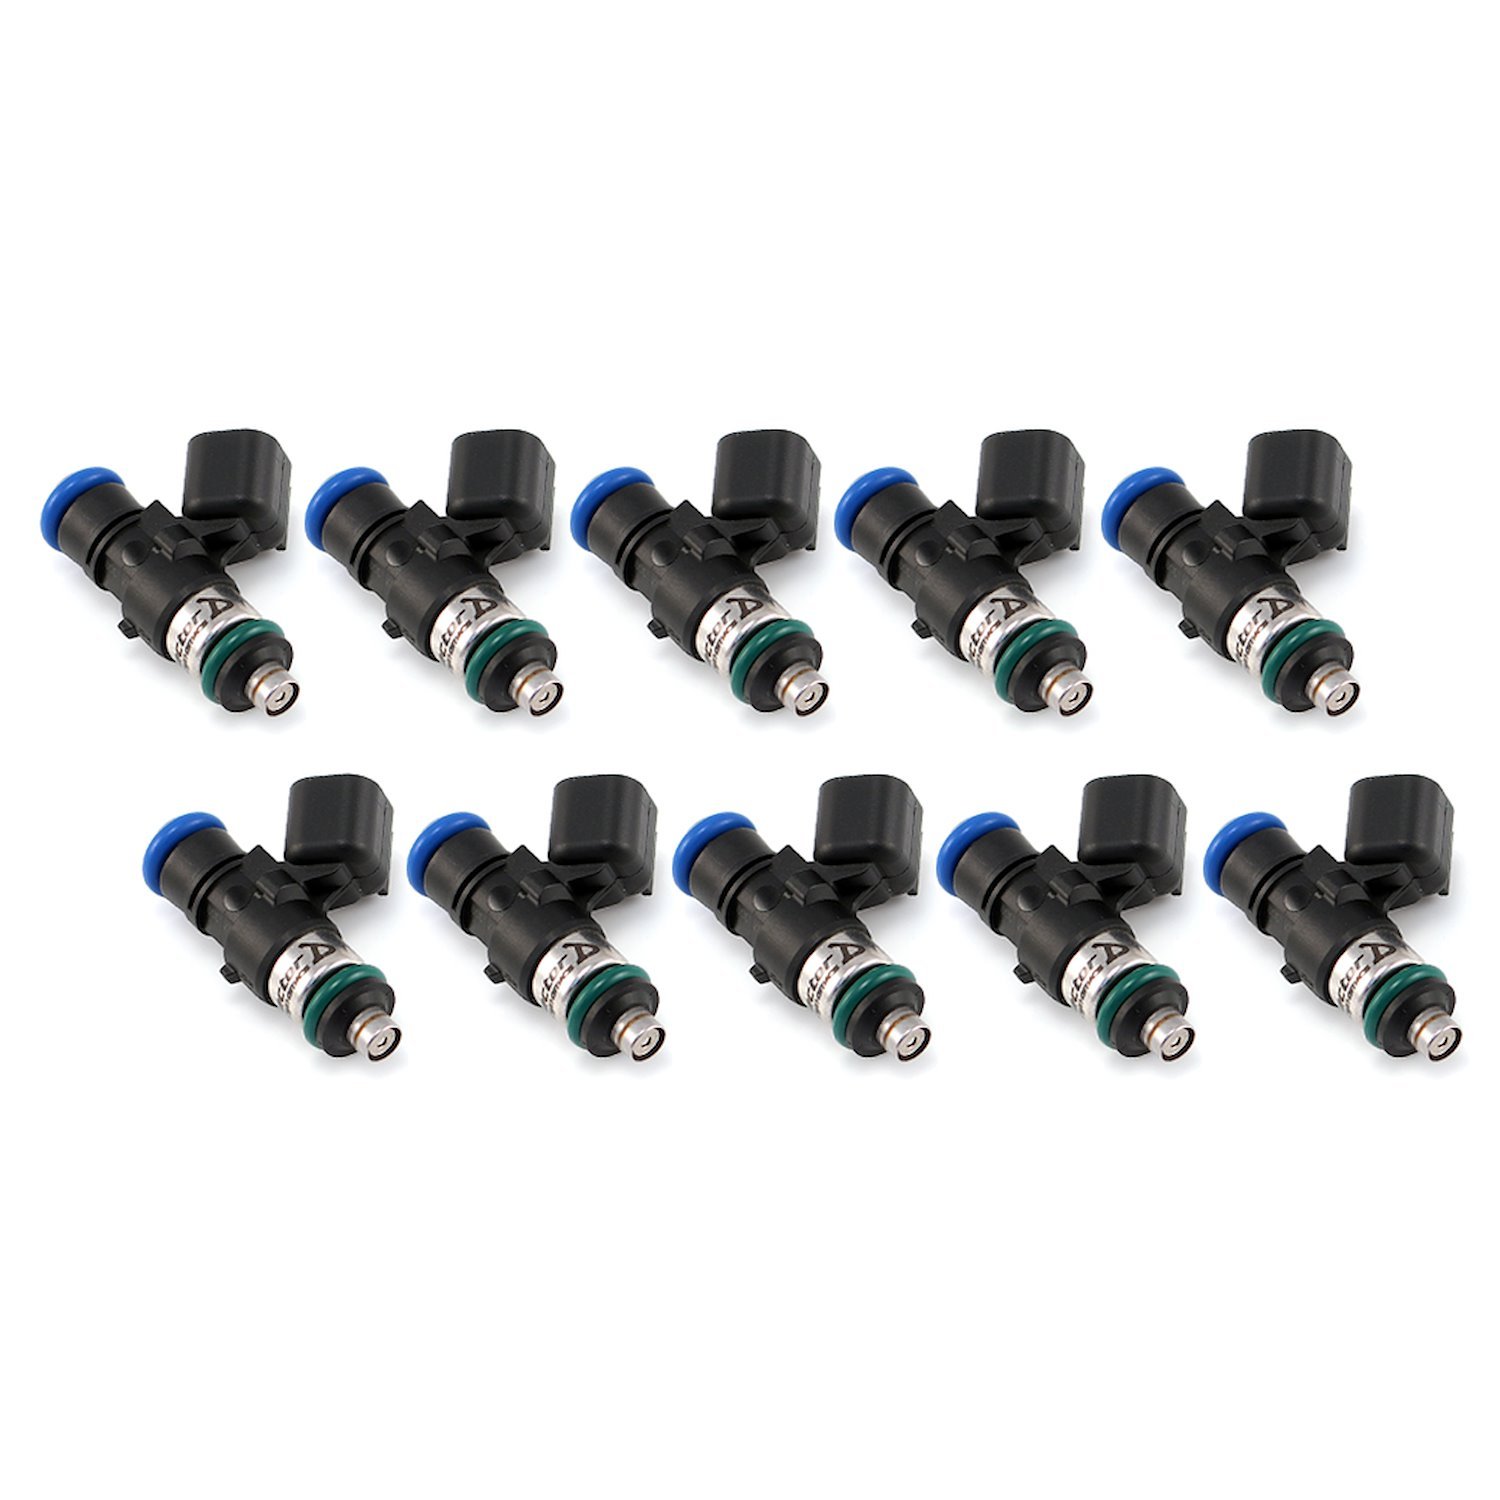 1300.34.14.14.10 1300cc Fuel Injector Set, 2015+ Audi R8, St&ard No Adapters, 14 mm Lower O-Ring